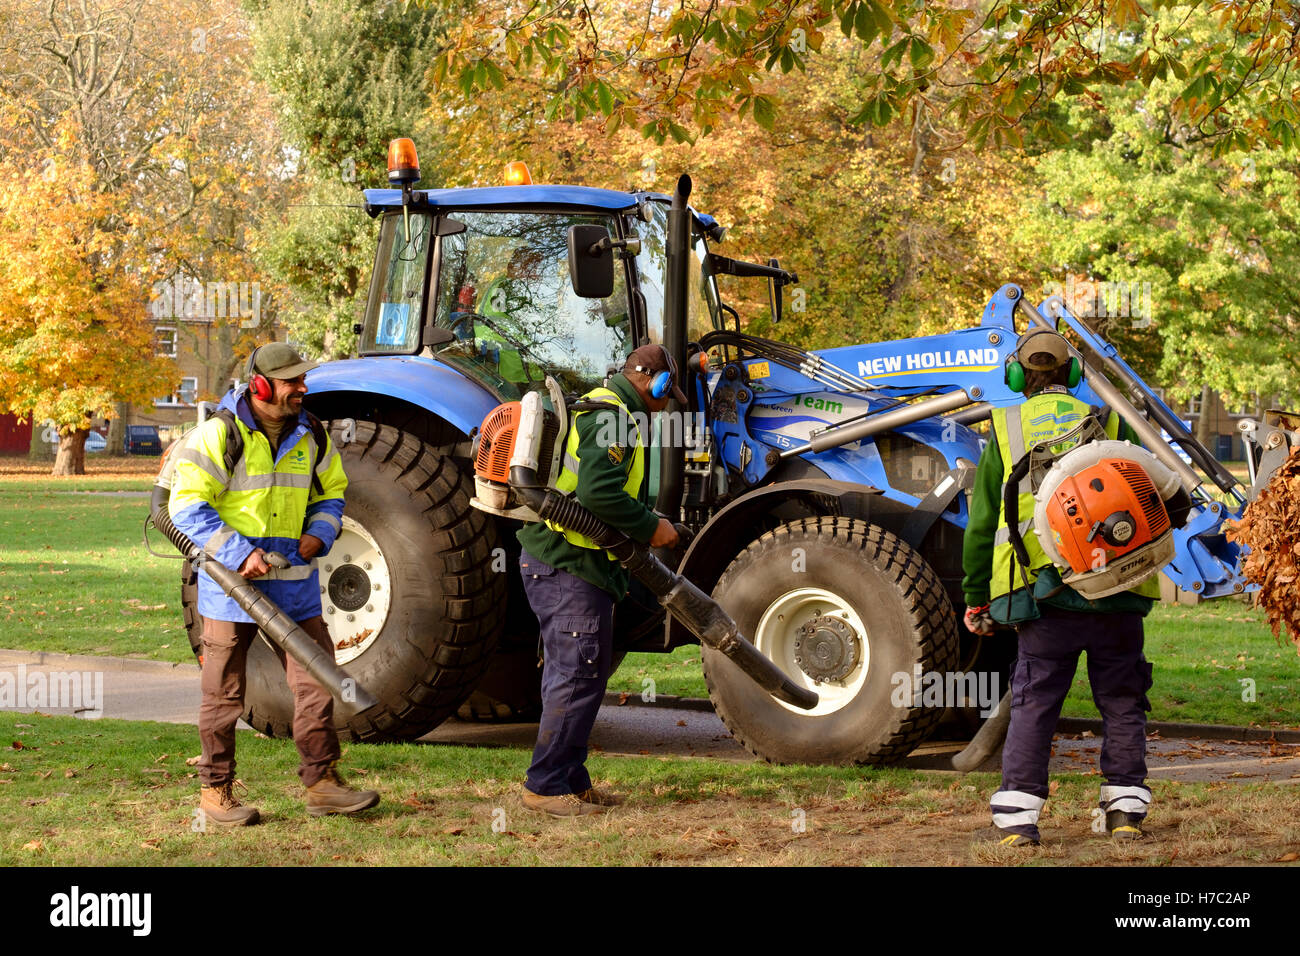 Workmen in hi viz using leaf blowers to clear autumn leaves. Victoria Park, East London, 2016 Stock Photo